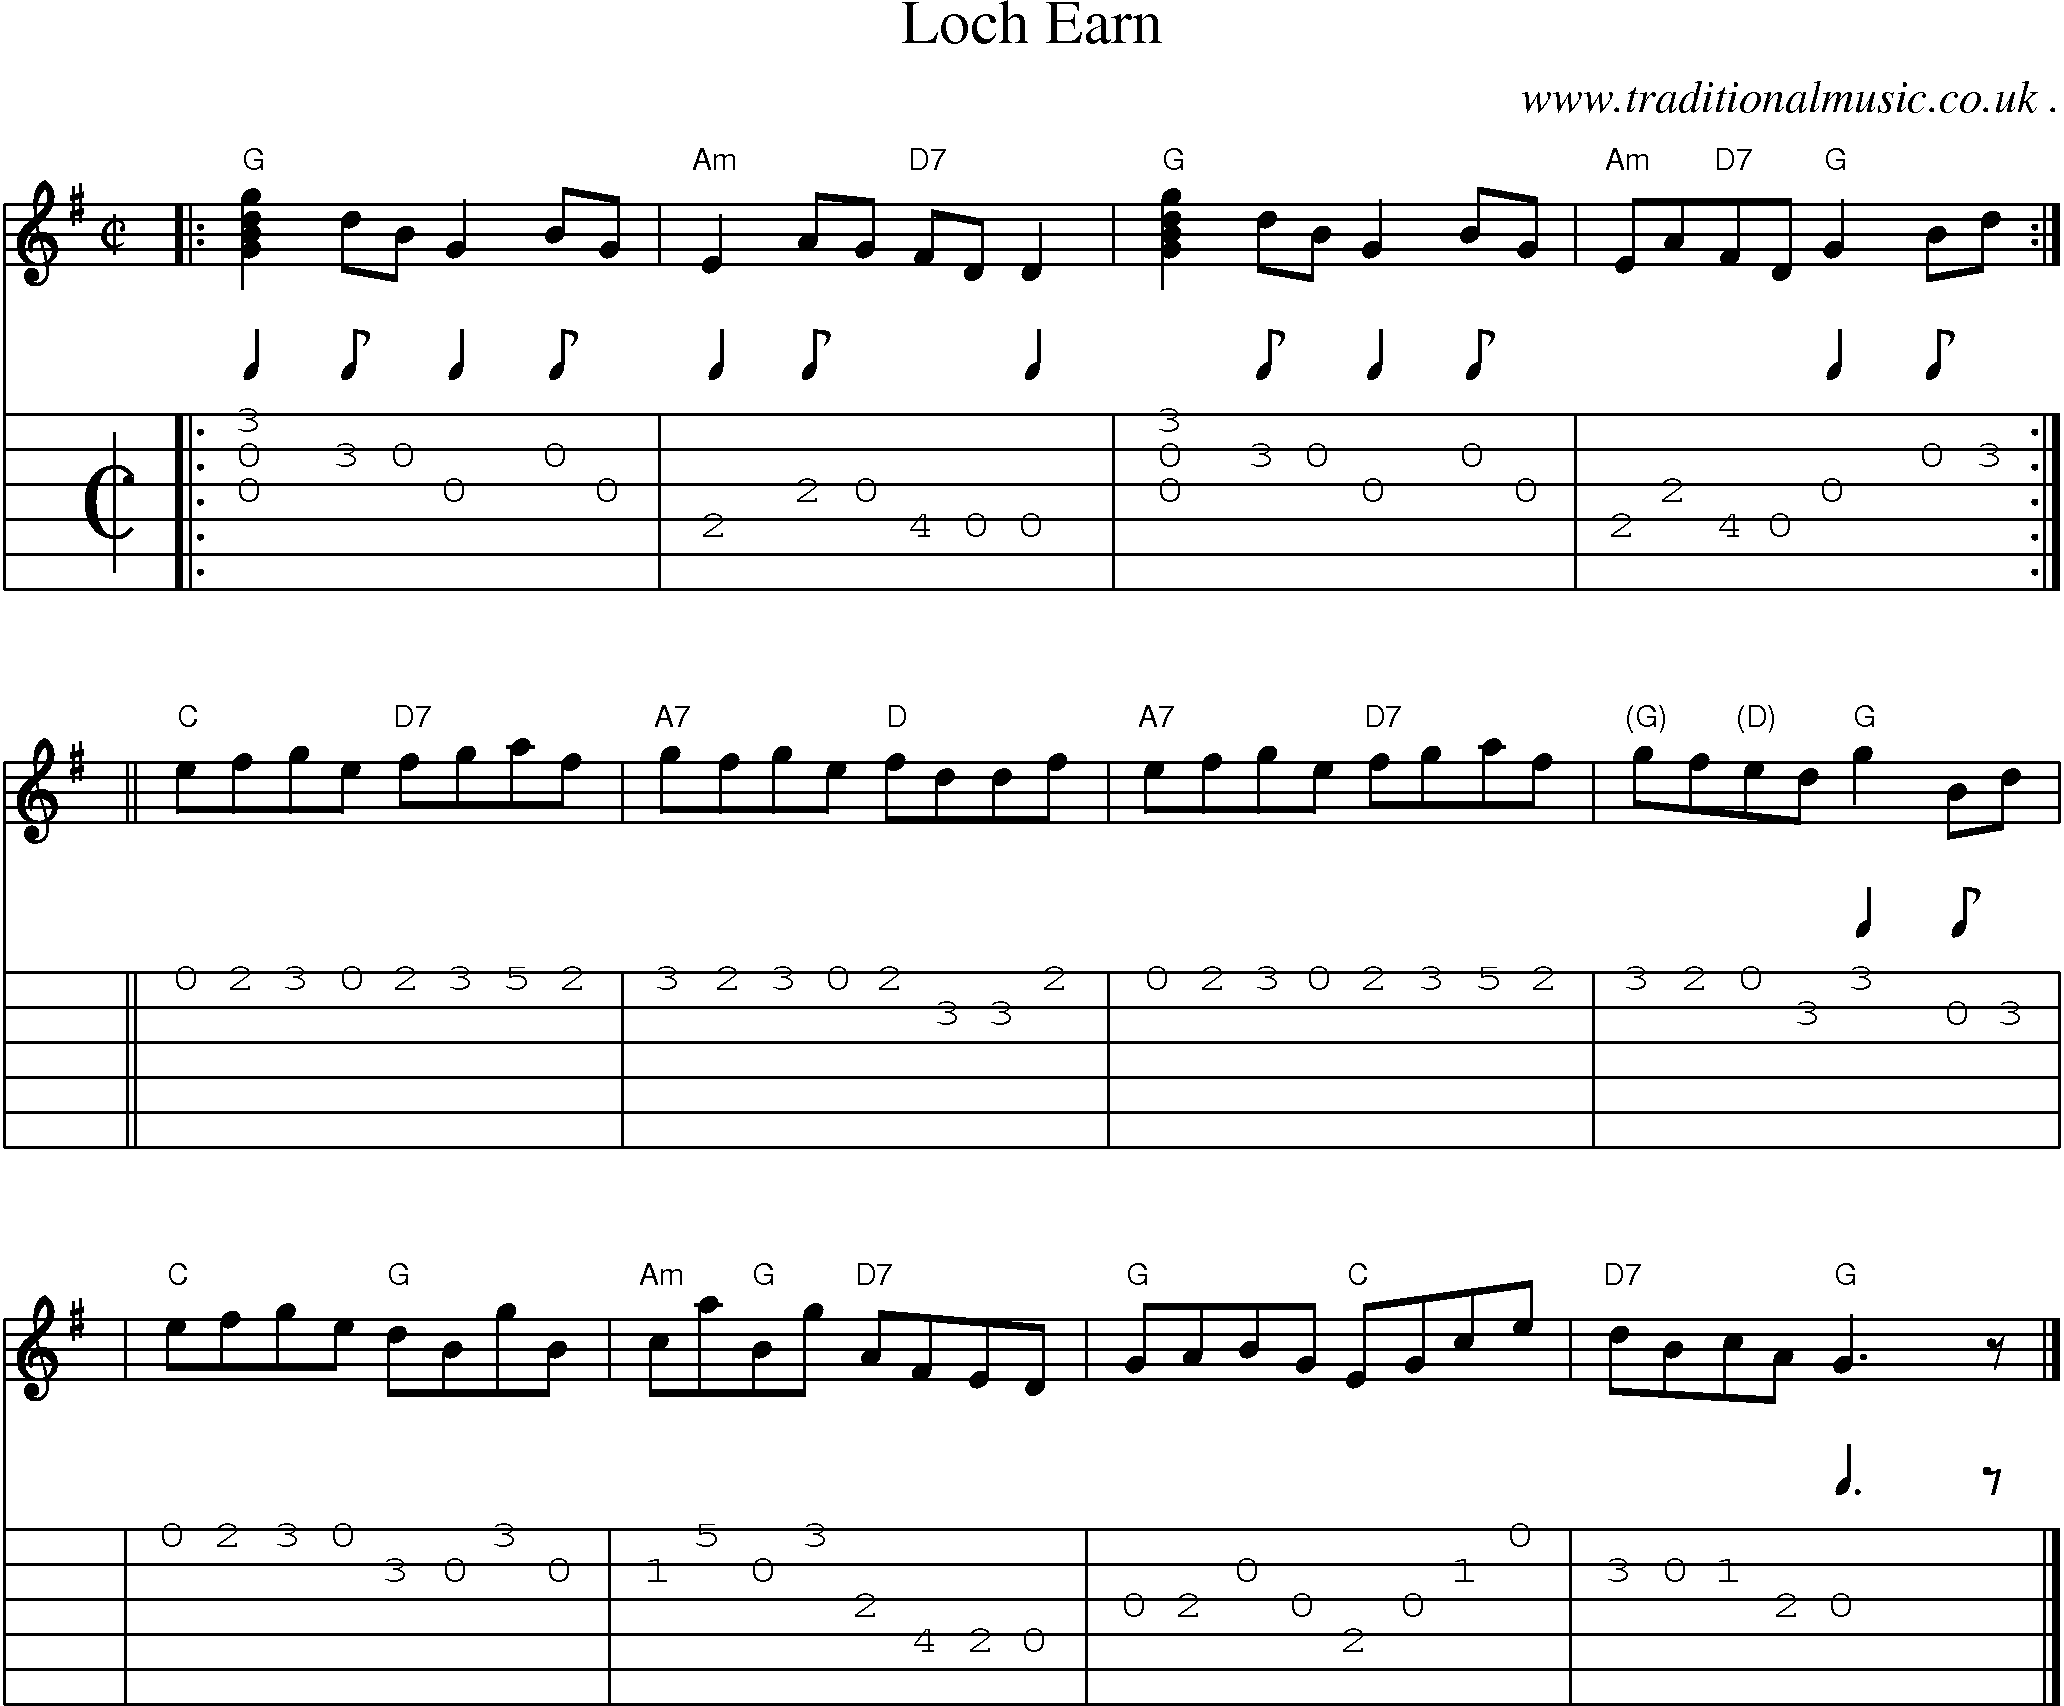 Sheet-music  score, Chords and Guitar Tabs for Loch Earn